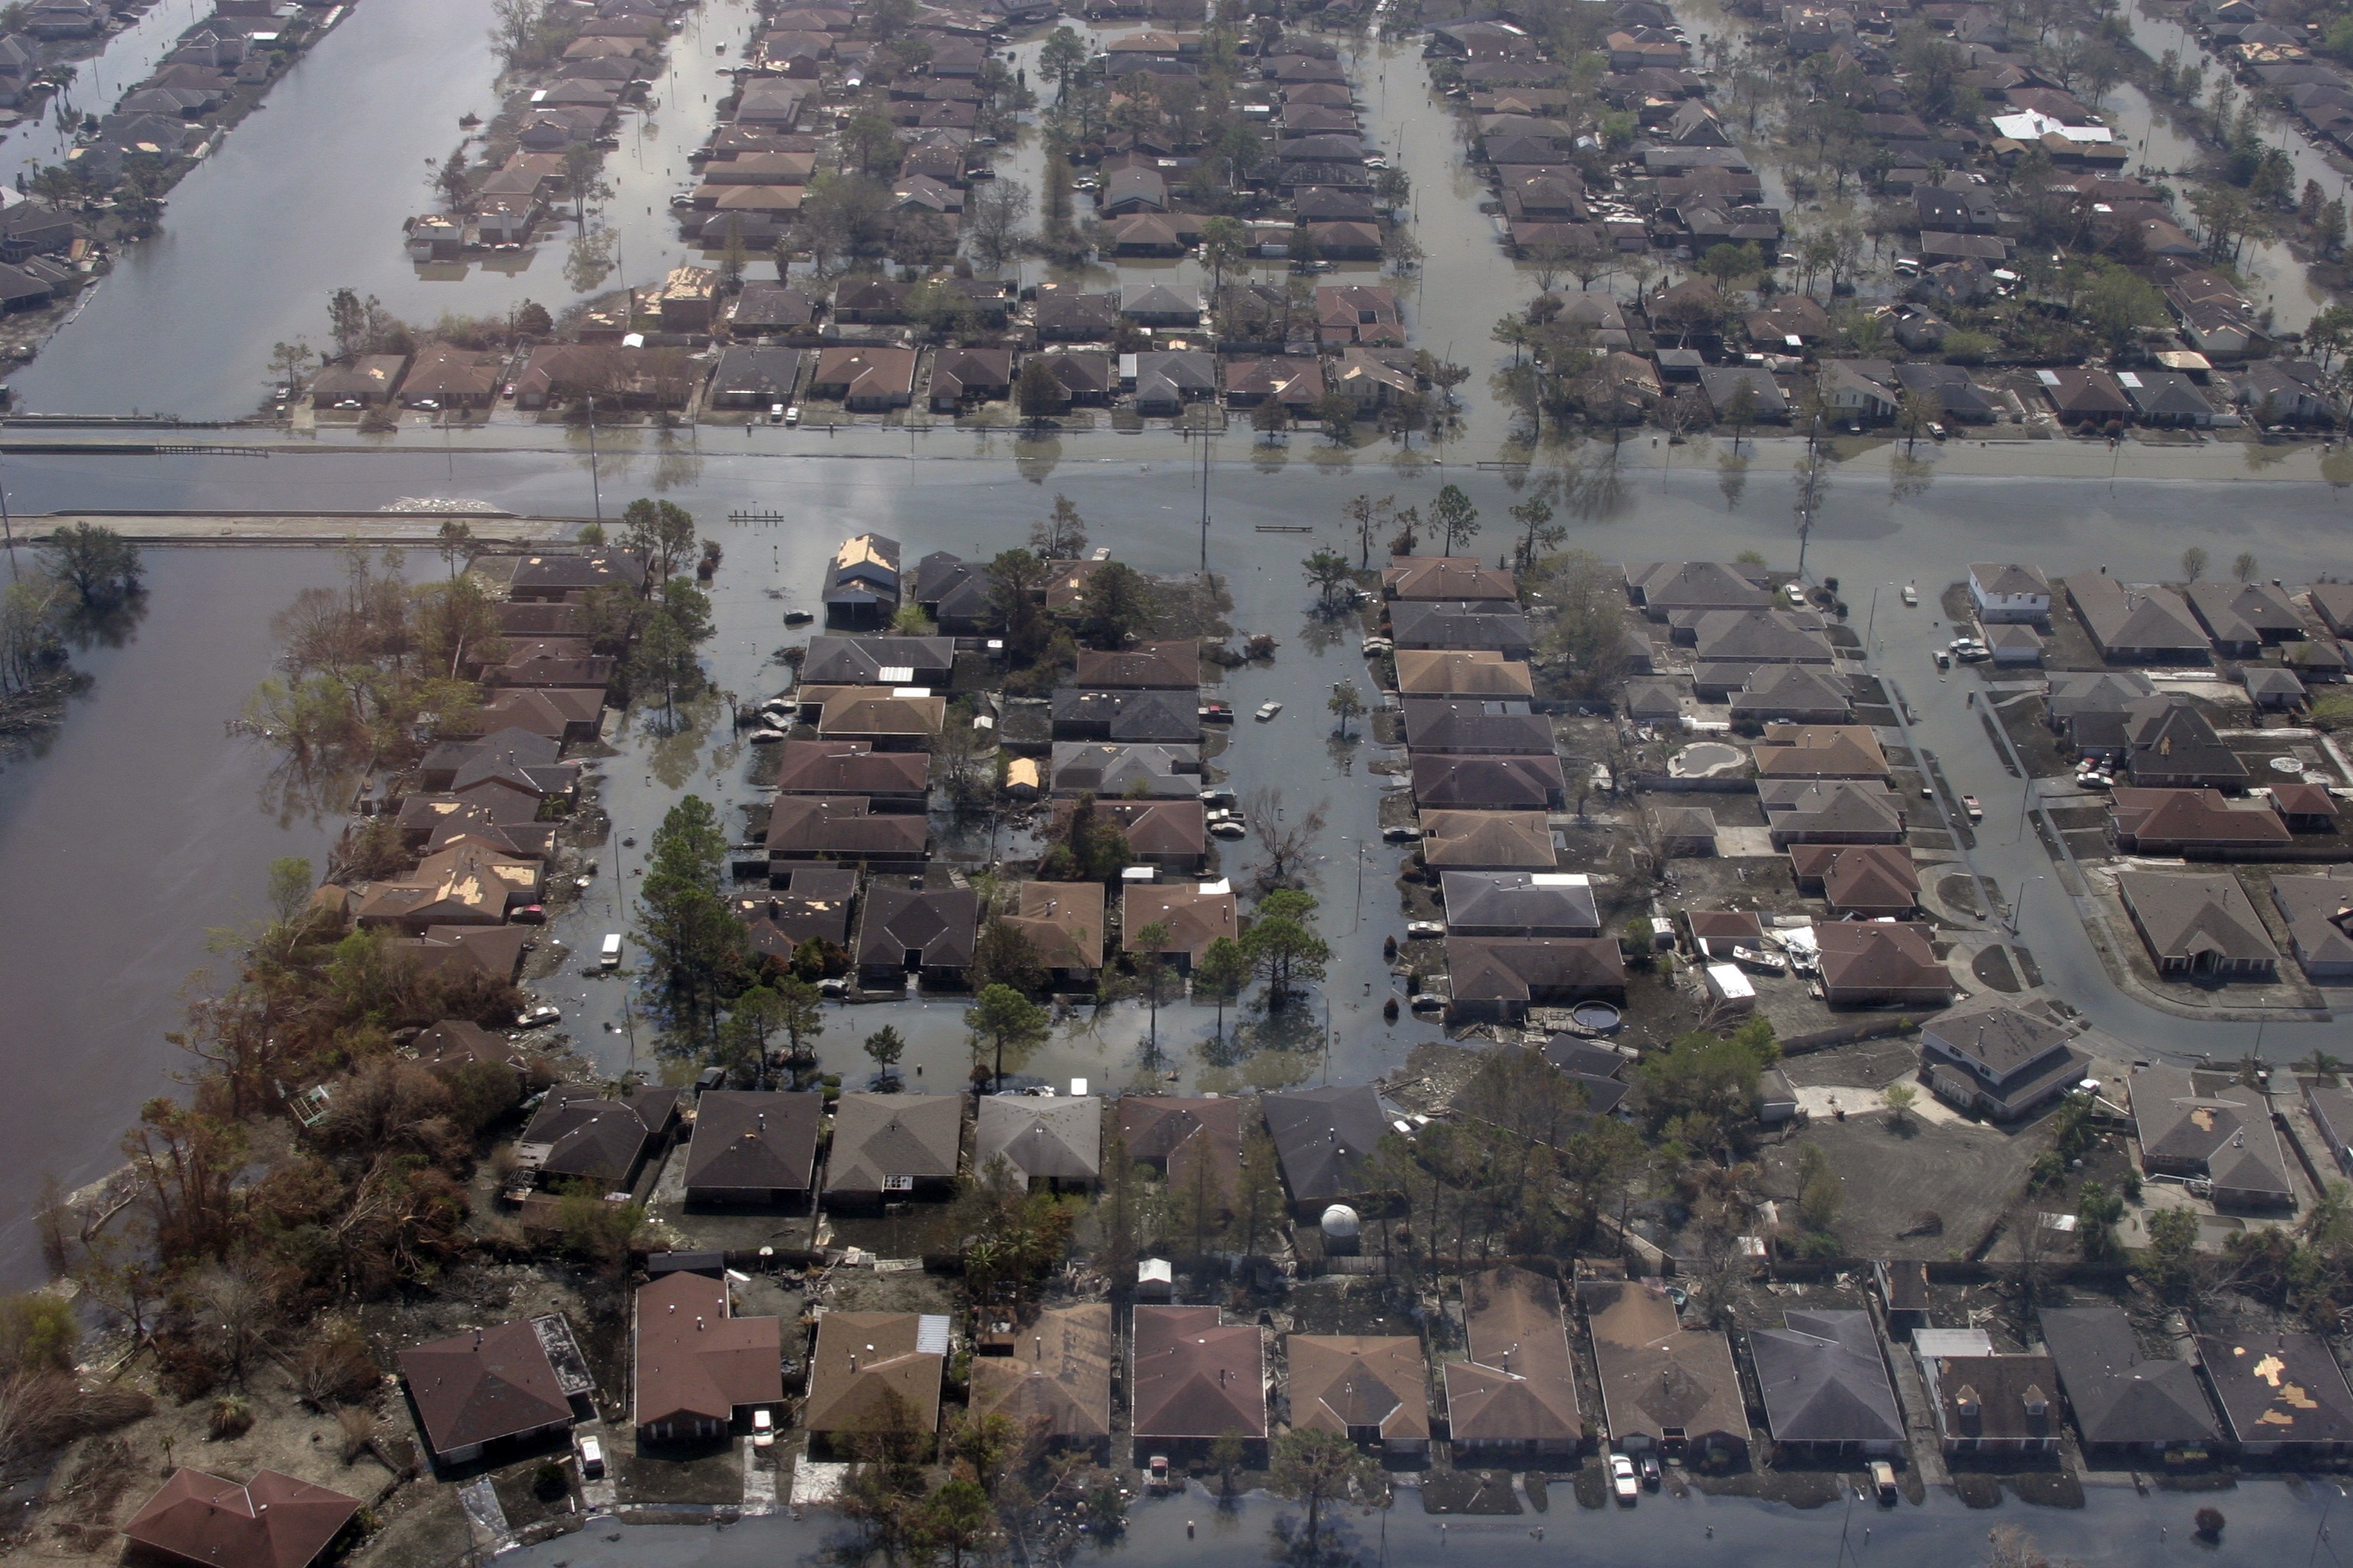 A scene in a neighborhood outside New Orleans after Hurricane Katrina, 2005